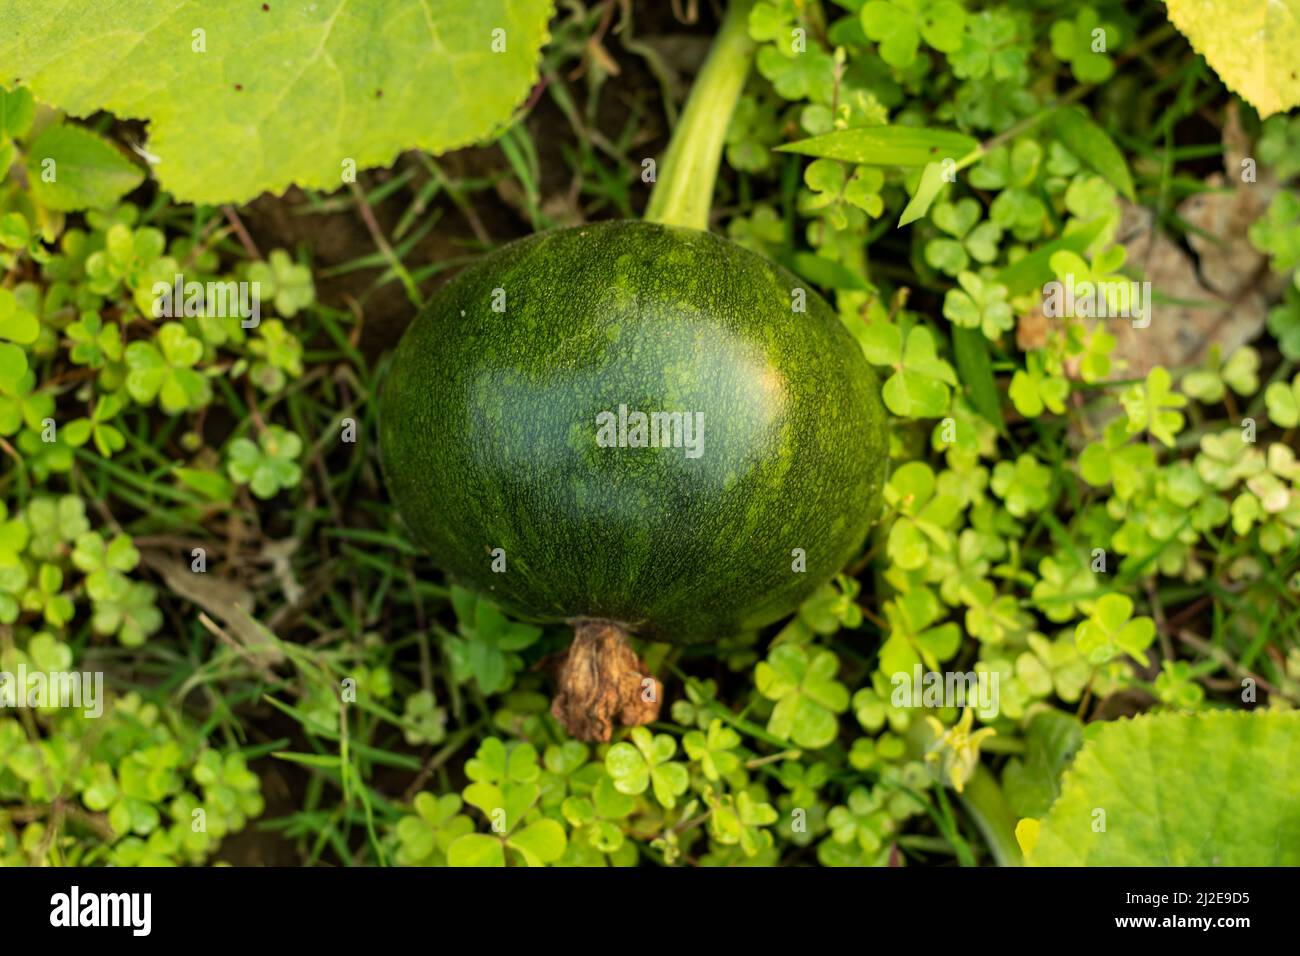 Green pumpkins are actually unripe that are still growing on the vine Green Pumpkins, Cucurbita, squash Dark green skins and acorn shape on fruits Stock Photo